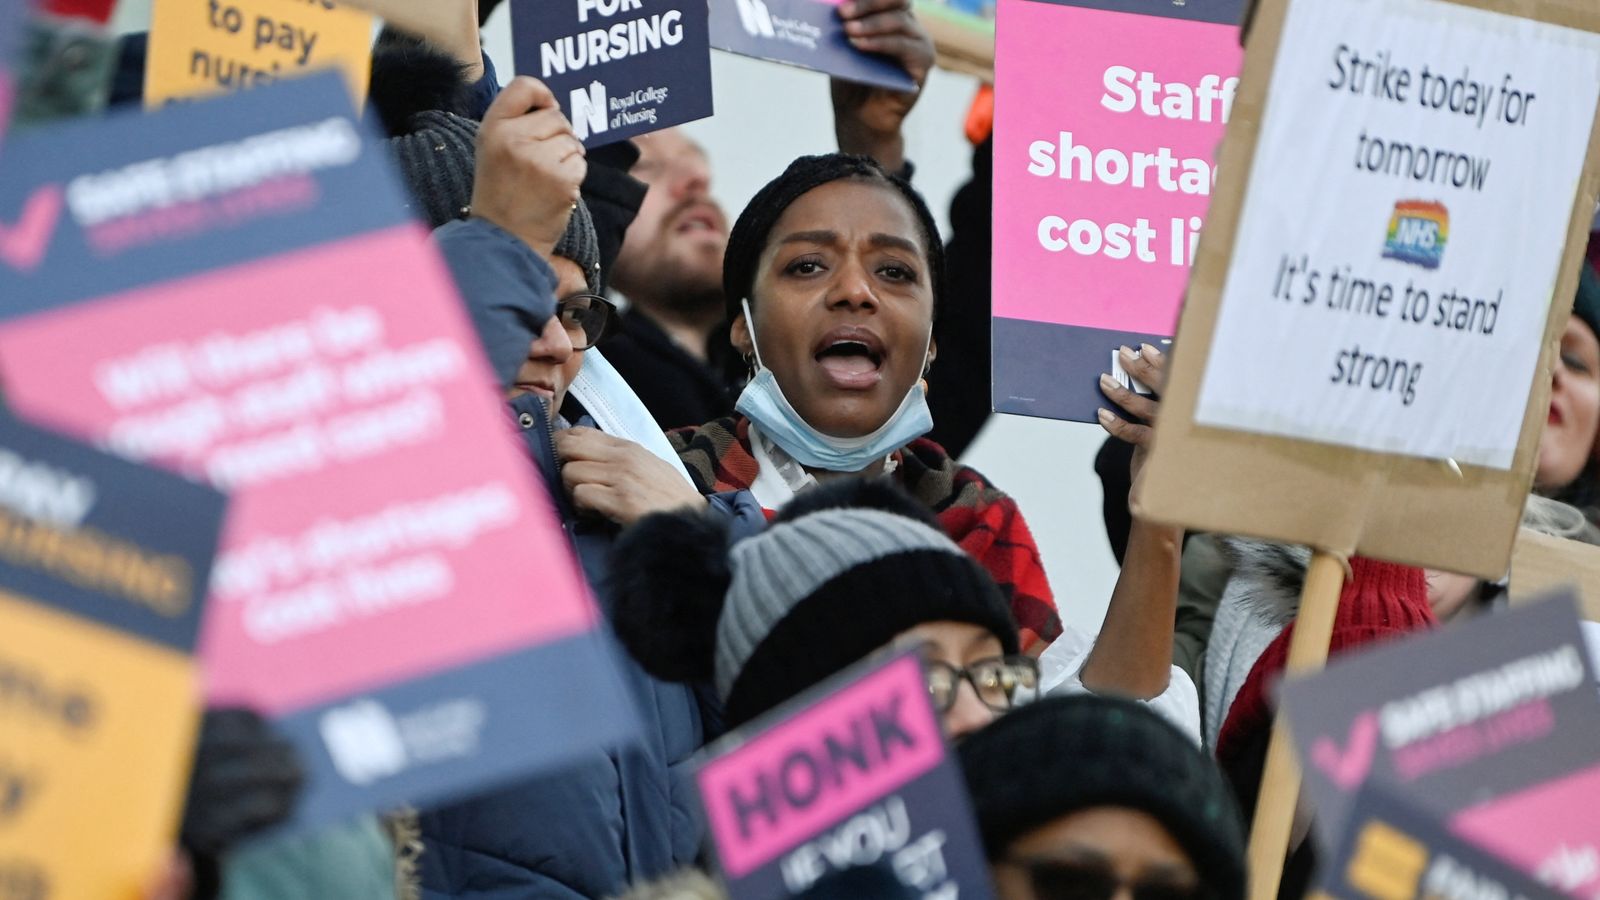 RCN pay vote: Almost 280,000 nursing staff to vote on new NHS pay offer in England